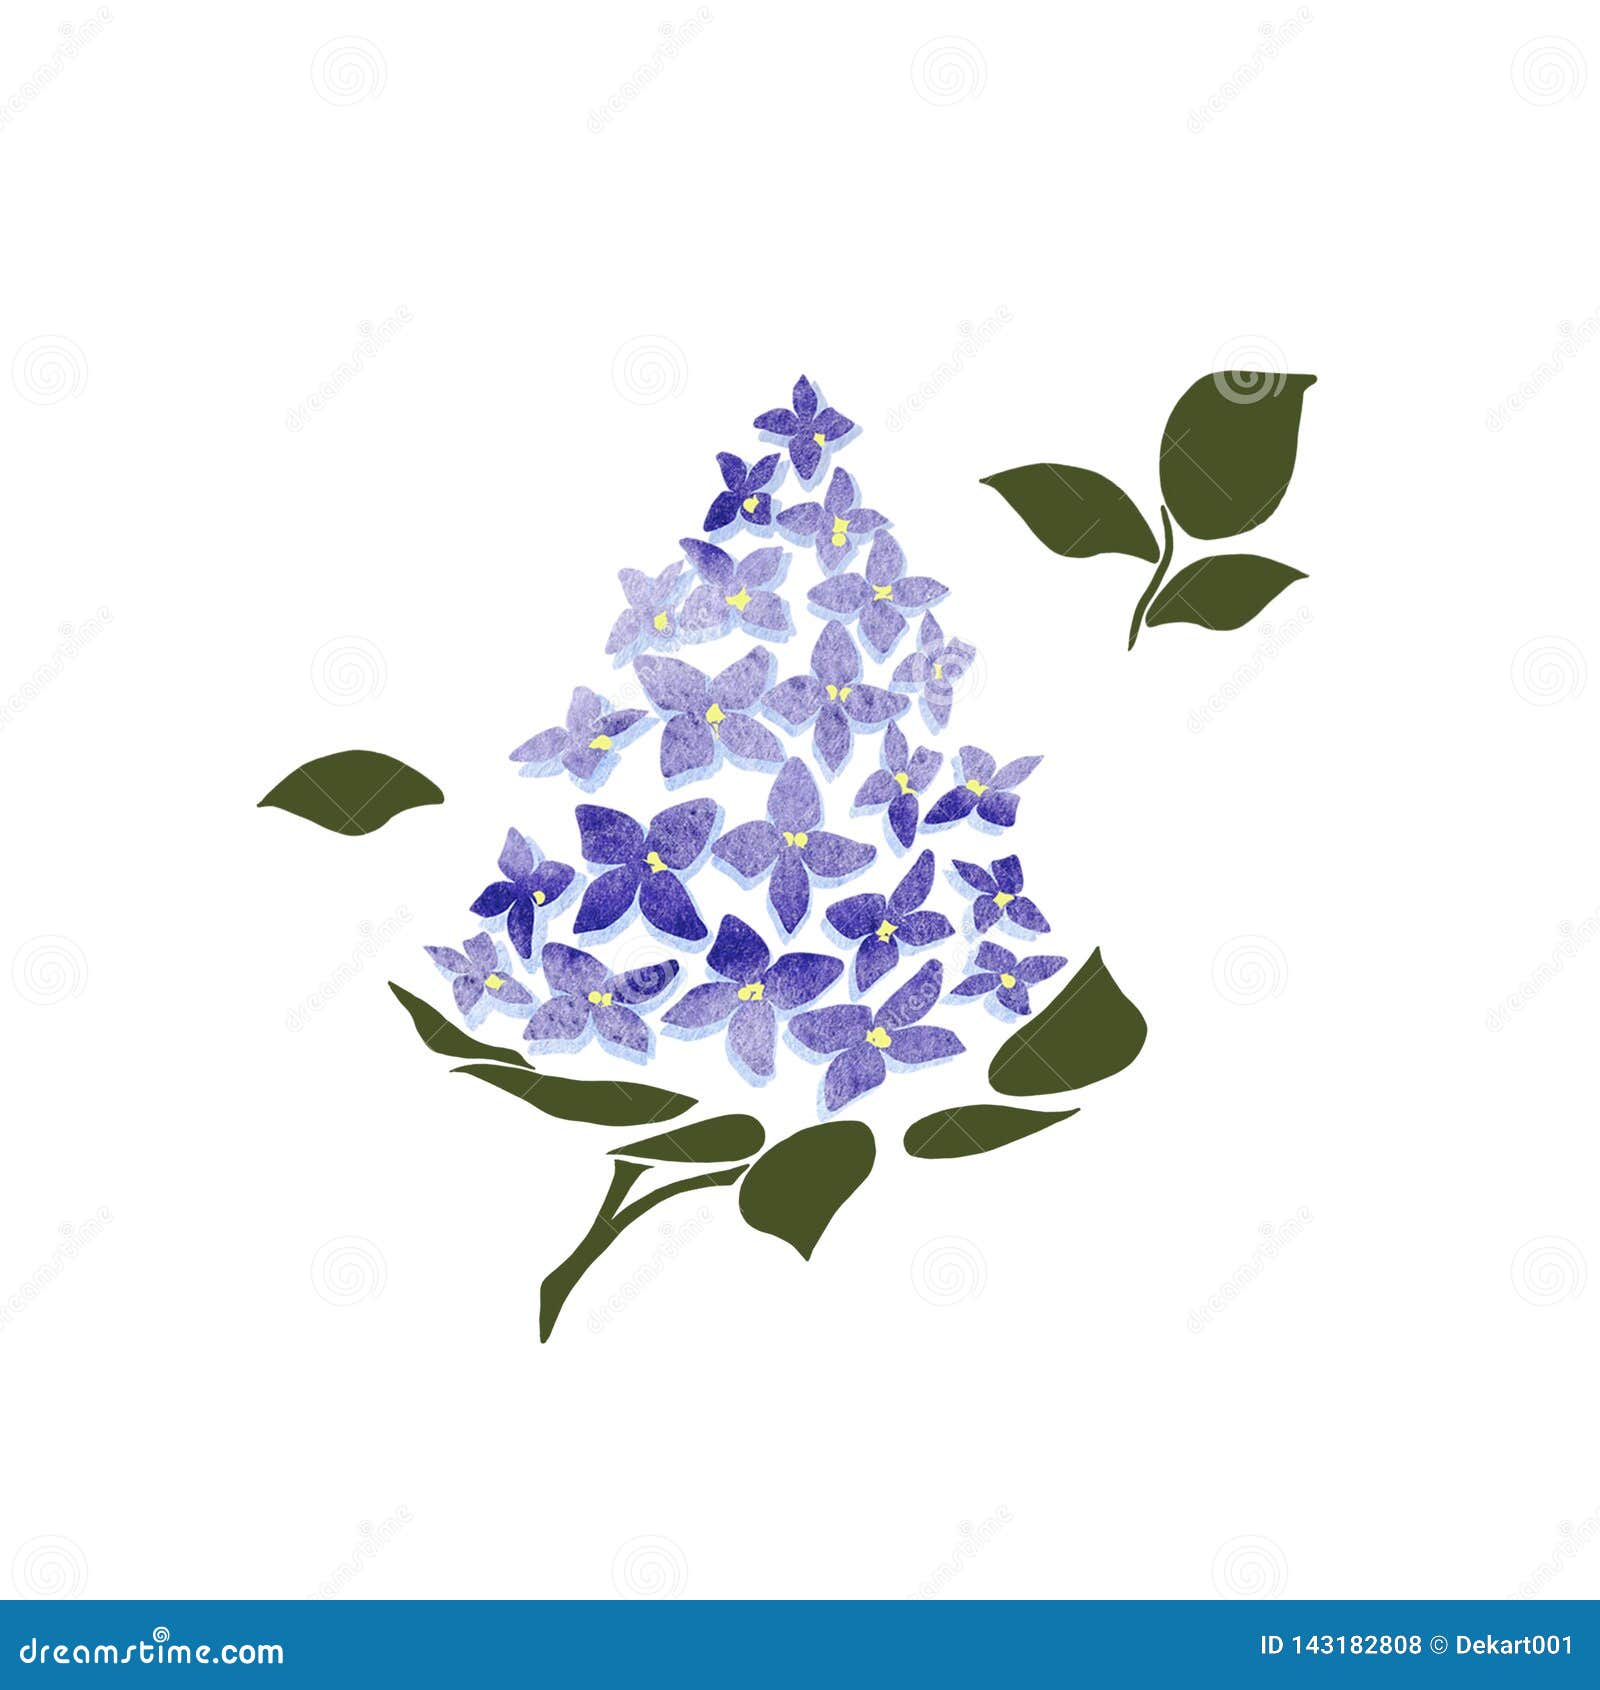 Blossoming Lilac On White Background Lilac Branch Flower Drawing Illustration Stock Illustration Illustration Of Blossoming Green 143182808